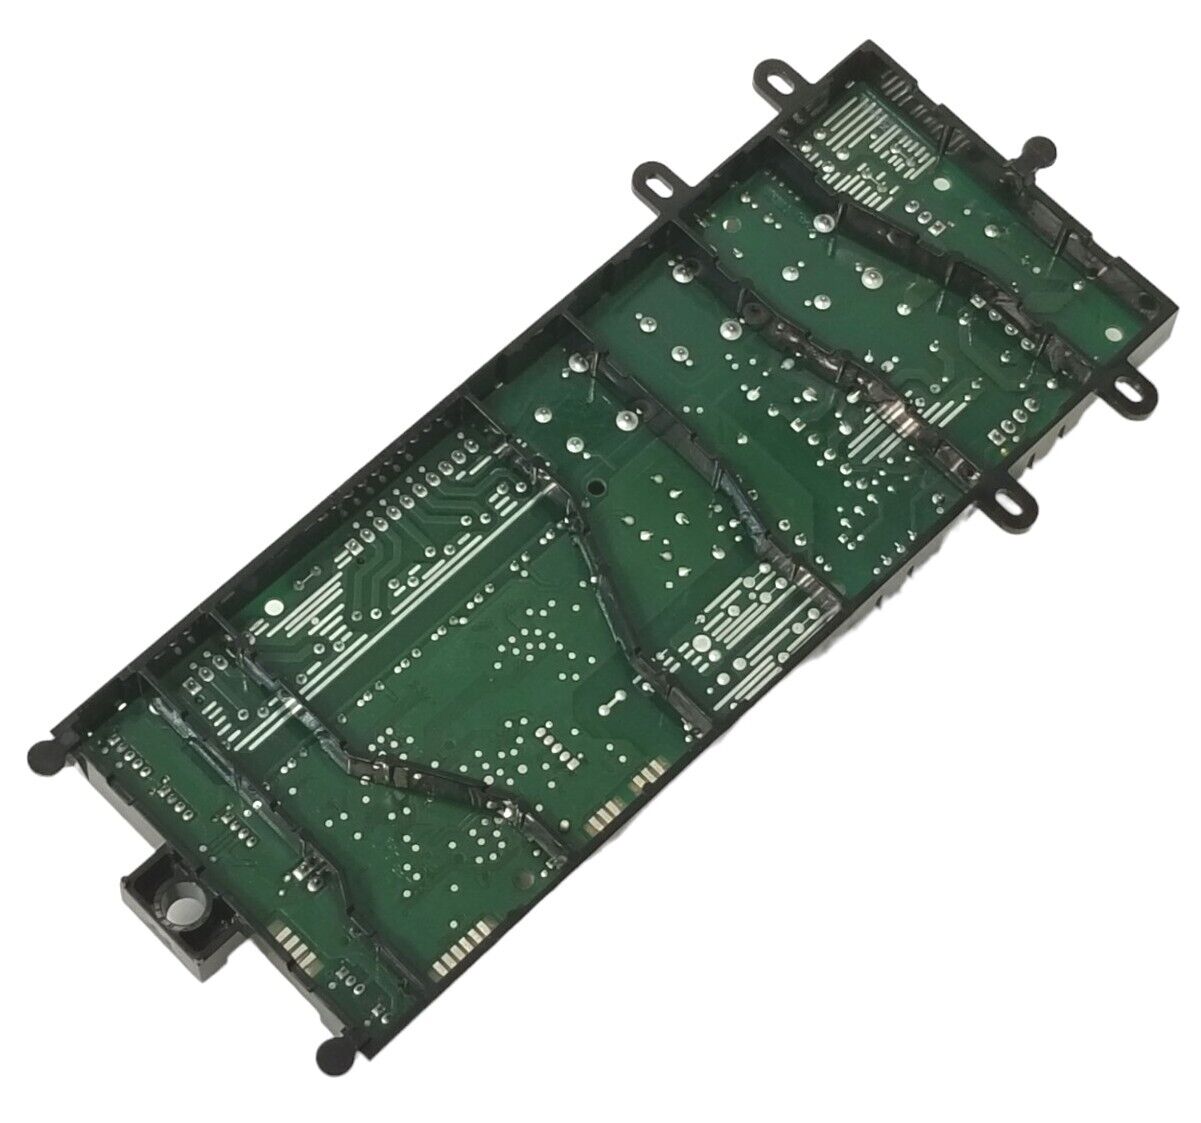 New Genuine OEM Replacement for Frigidaire Range Control Board 5304534719